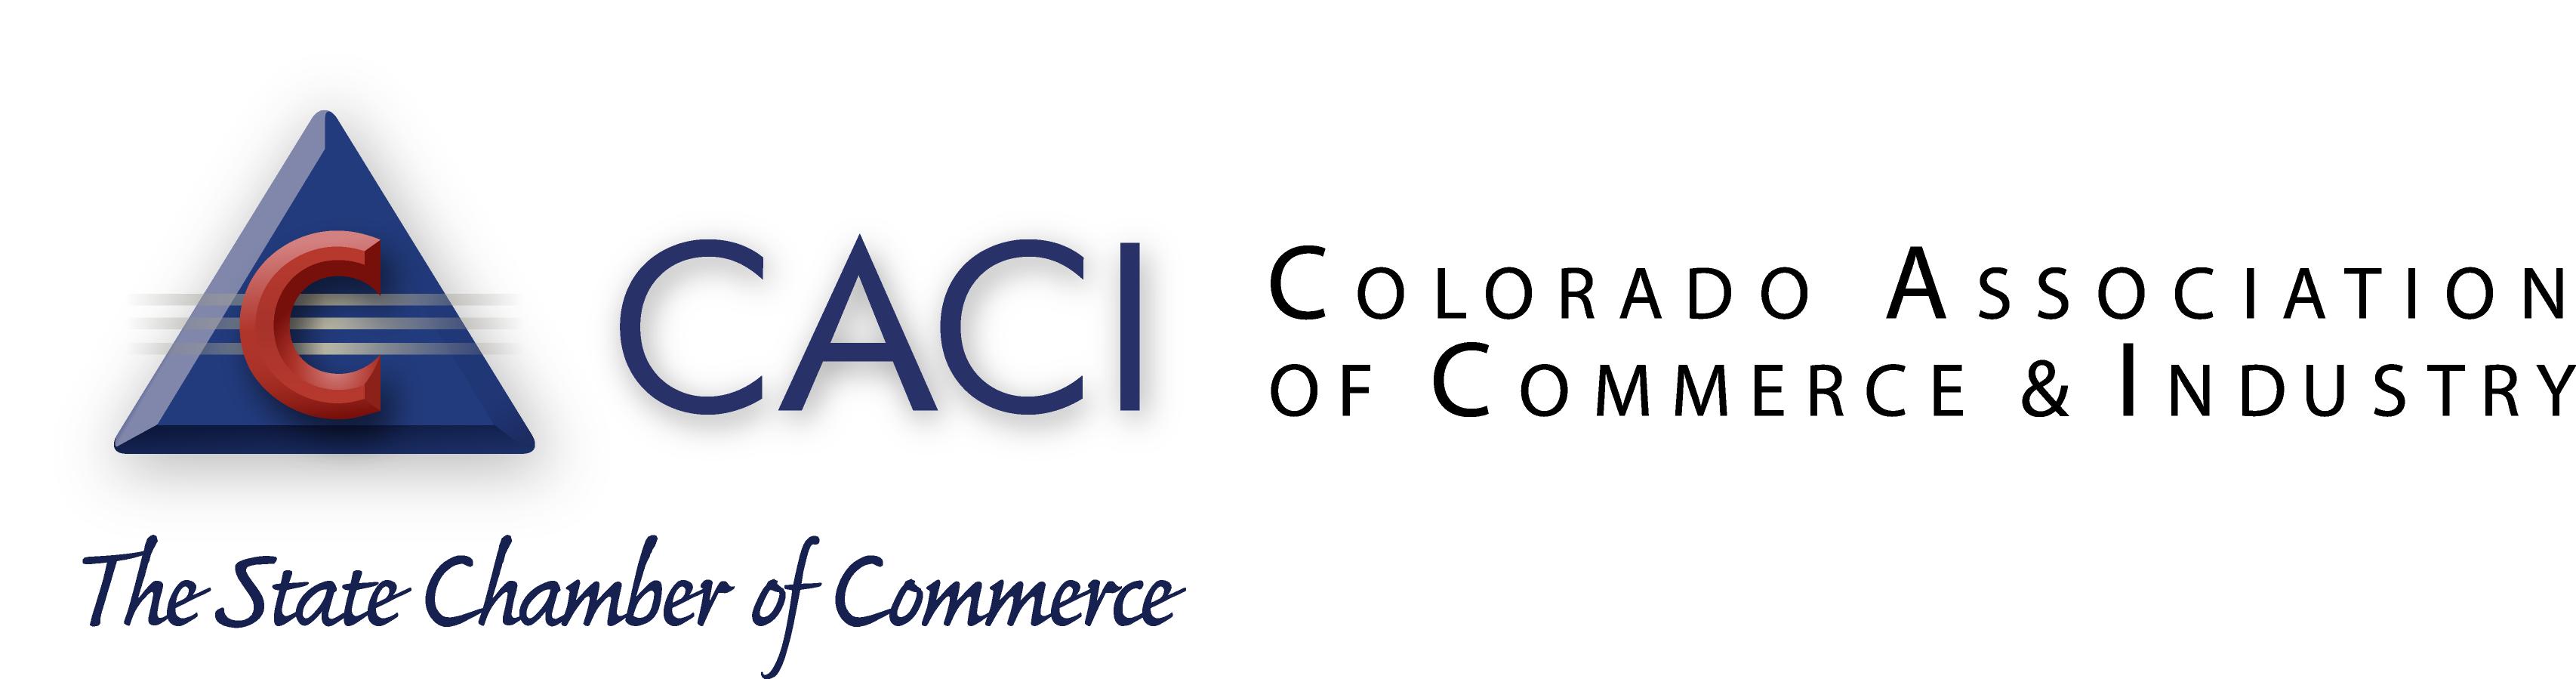 CACI Logo with Text Beside and State Chamber of Commerce